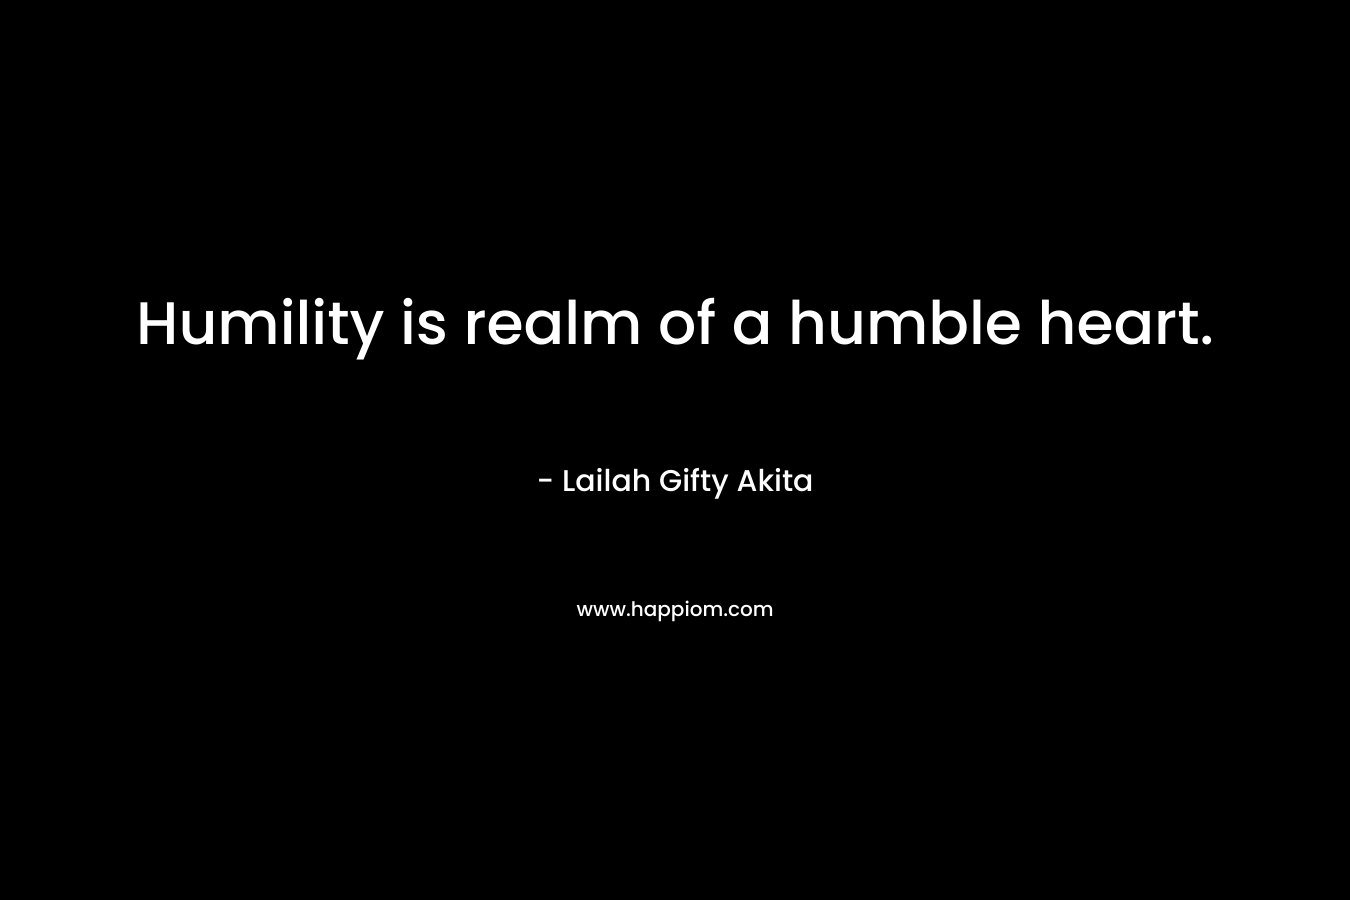 Humility is realm of a humble heart.